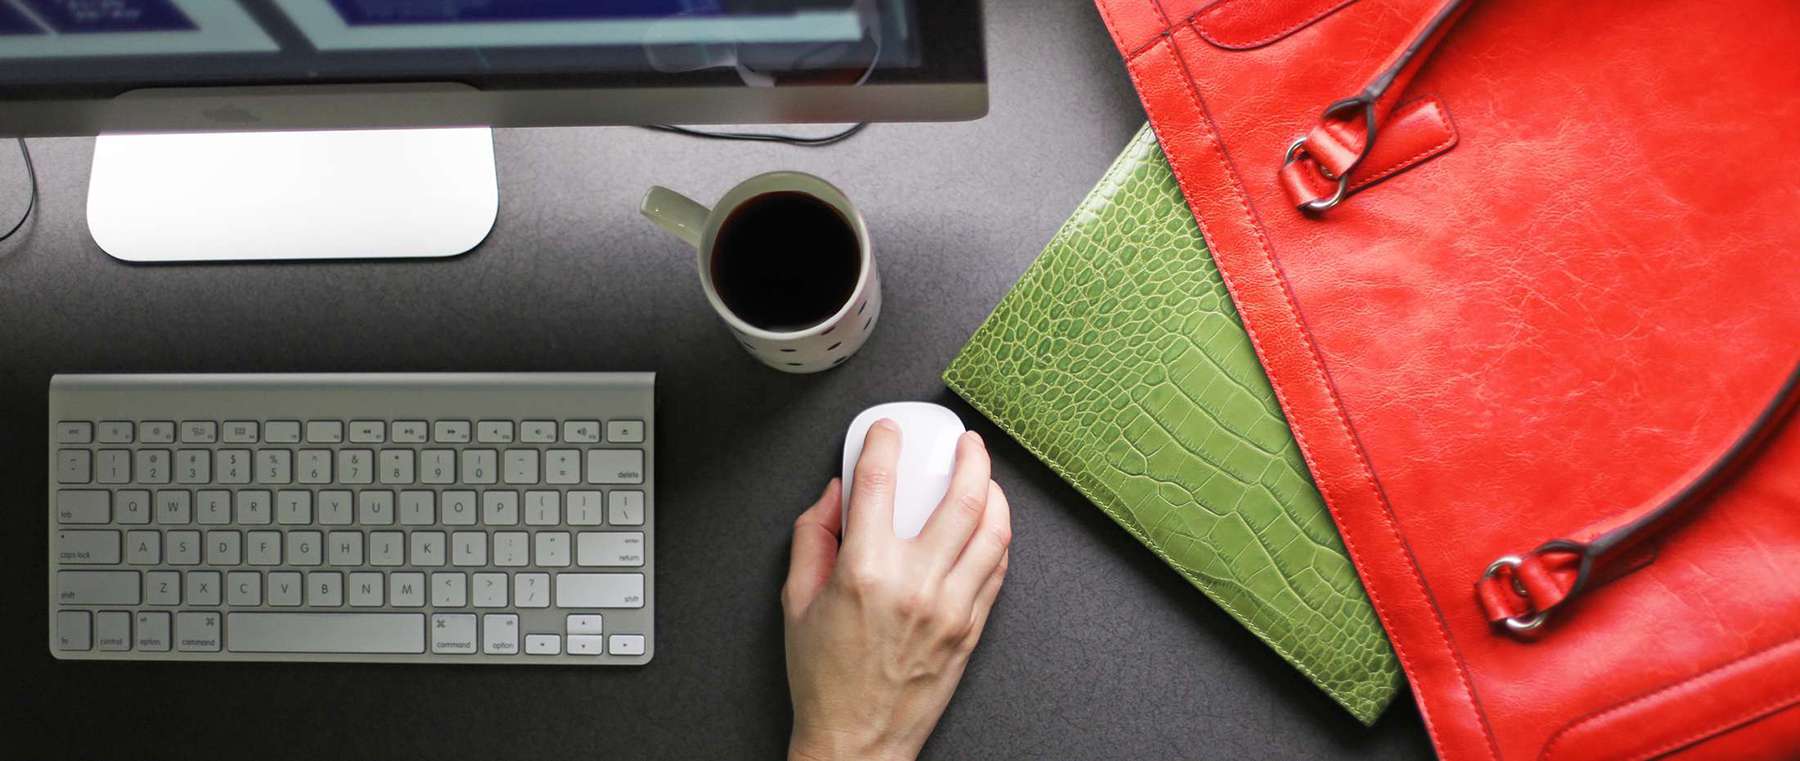 Close up of office desk with keyboard, mouse, coffee cup, red purse and green planner